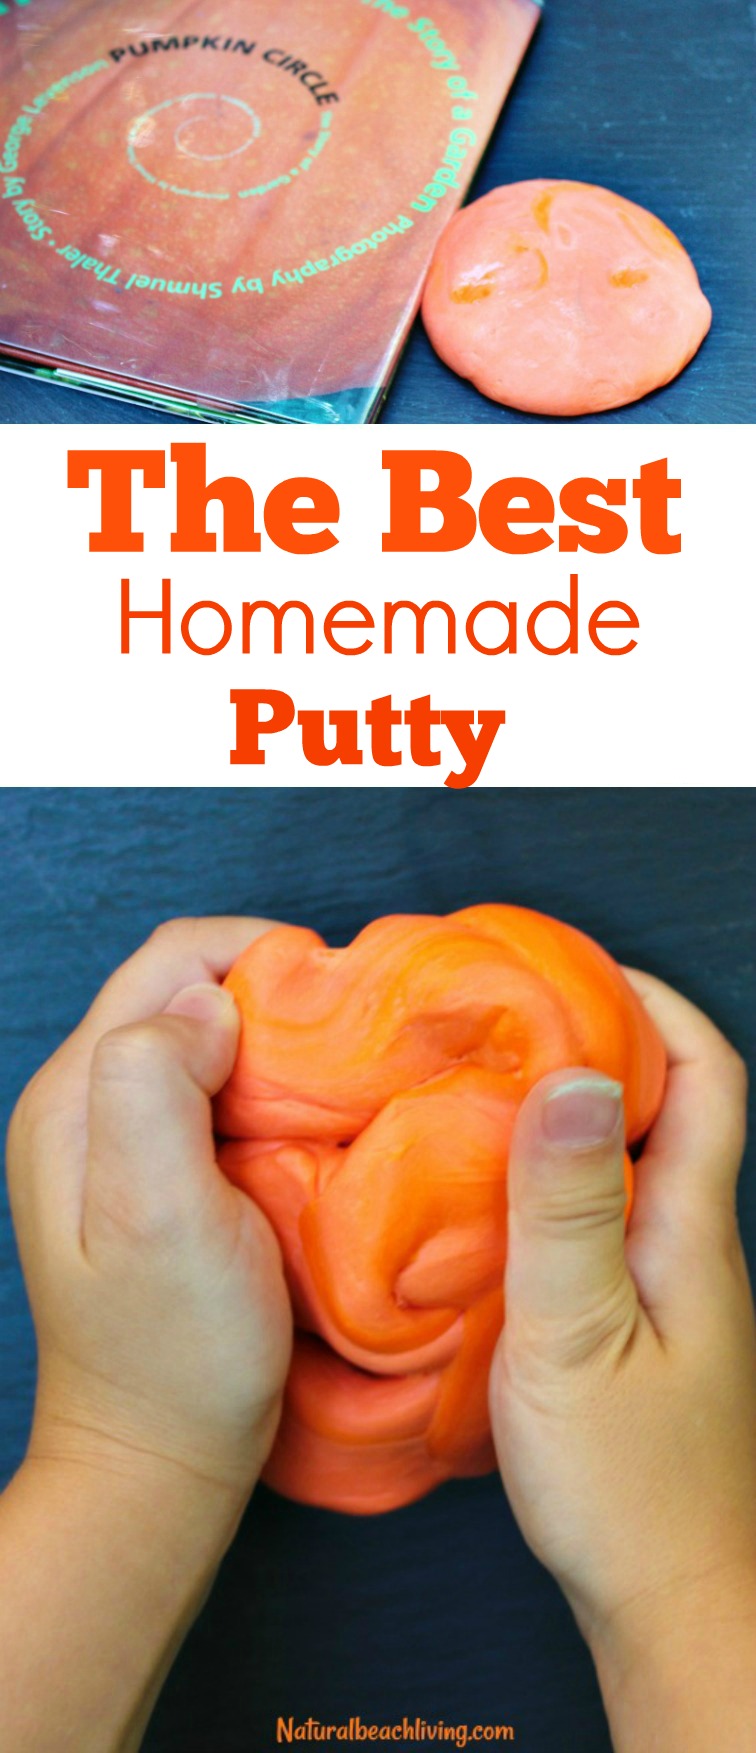 25+ Homemade Putty Recipes, Putty Recipes, How to Make Putty, Silly Putty Recipe, Therapy Putty Recipe, Edible Putty, Putty is a great tool for keeping your children focused and on working fine motor skills. All you need is a few simple ingredients, and you'll have a homemade putty everyone will want to play with.